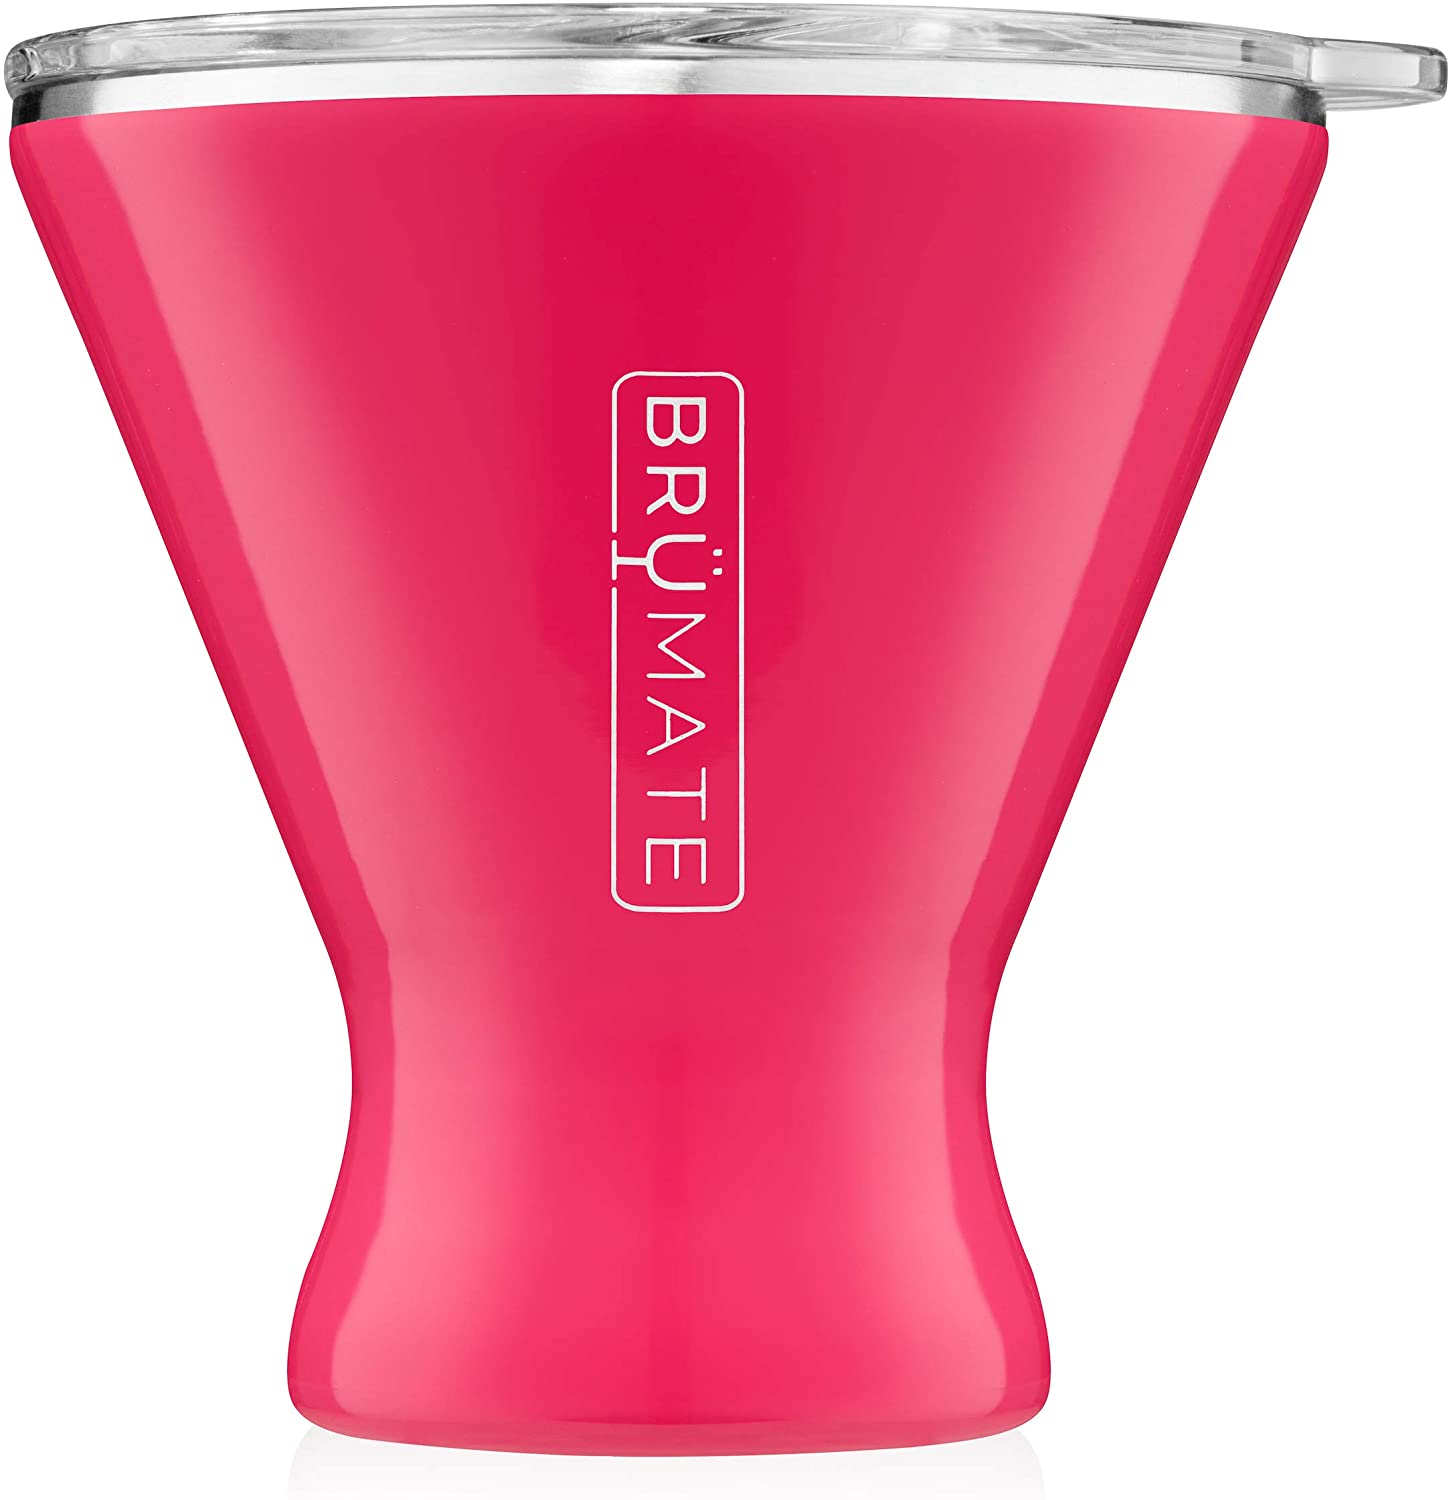 inexpensive-christmas-gifts-cocktail-tumbler